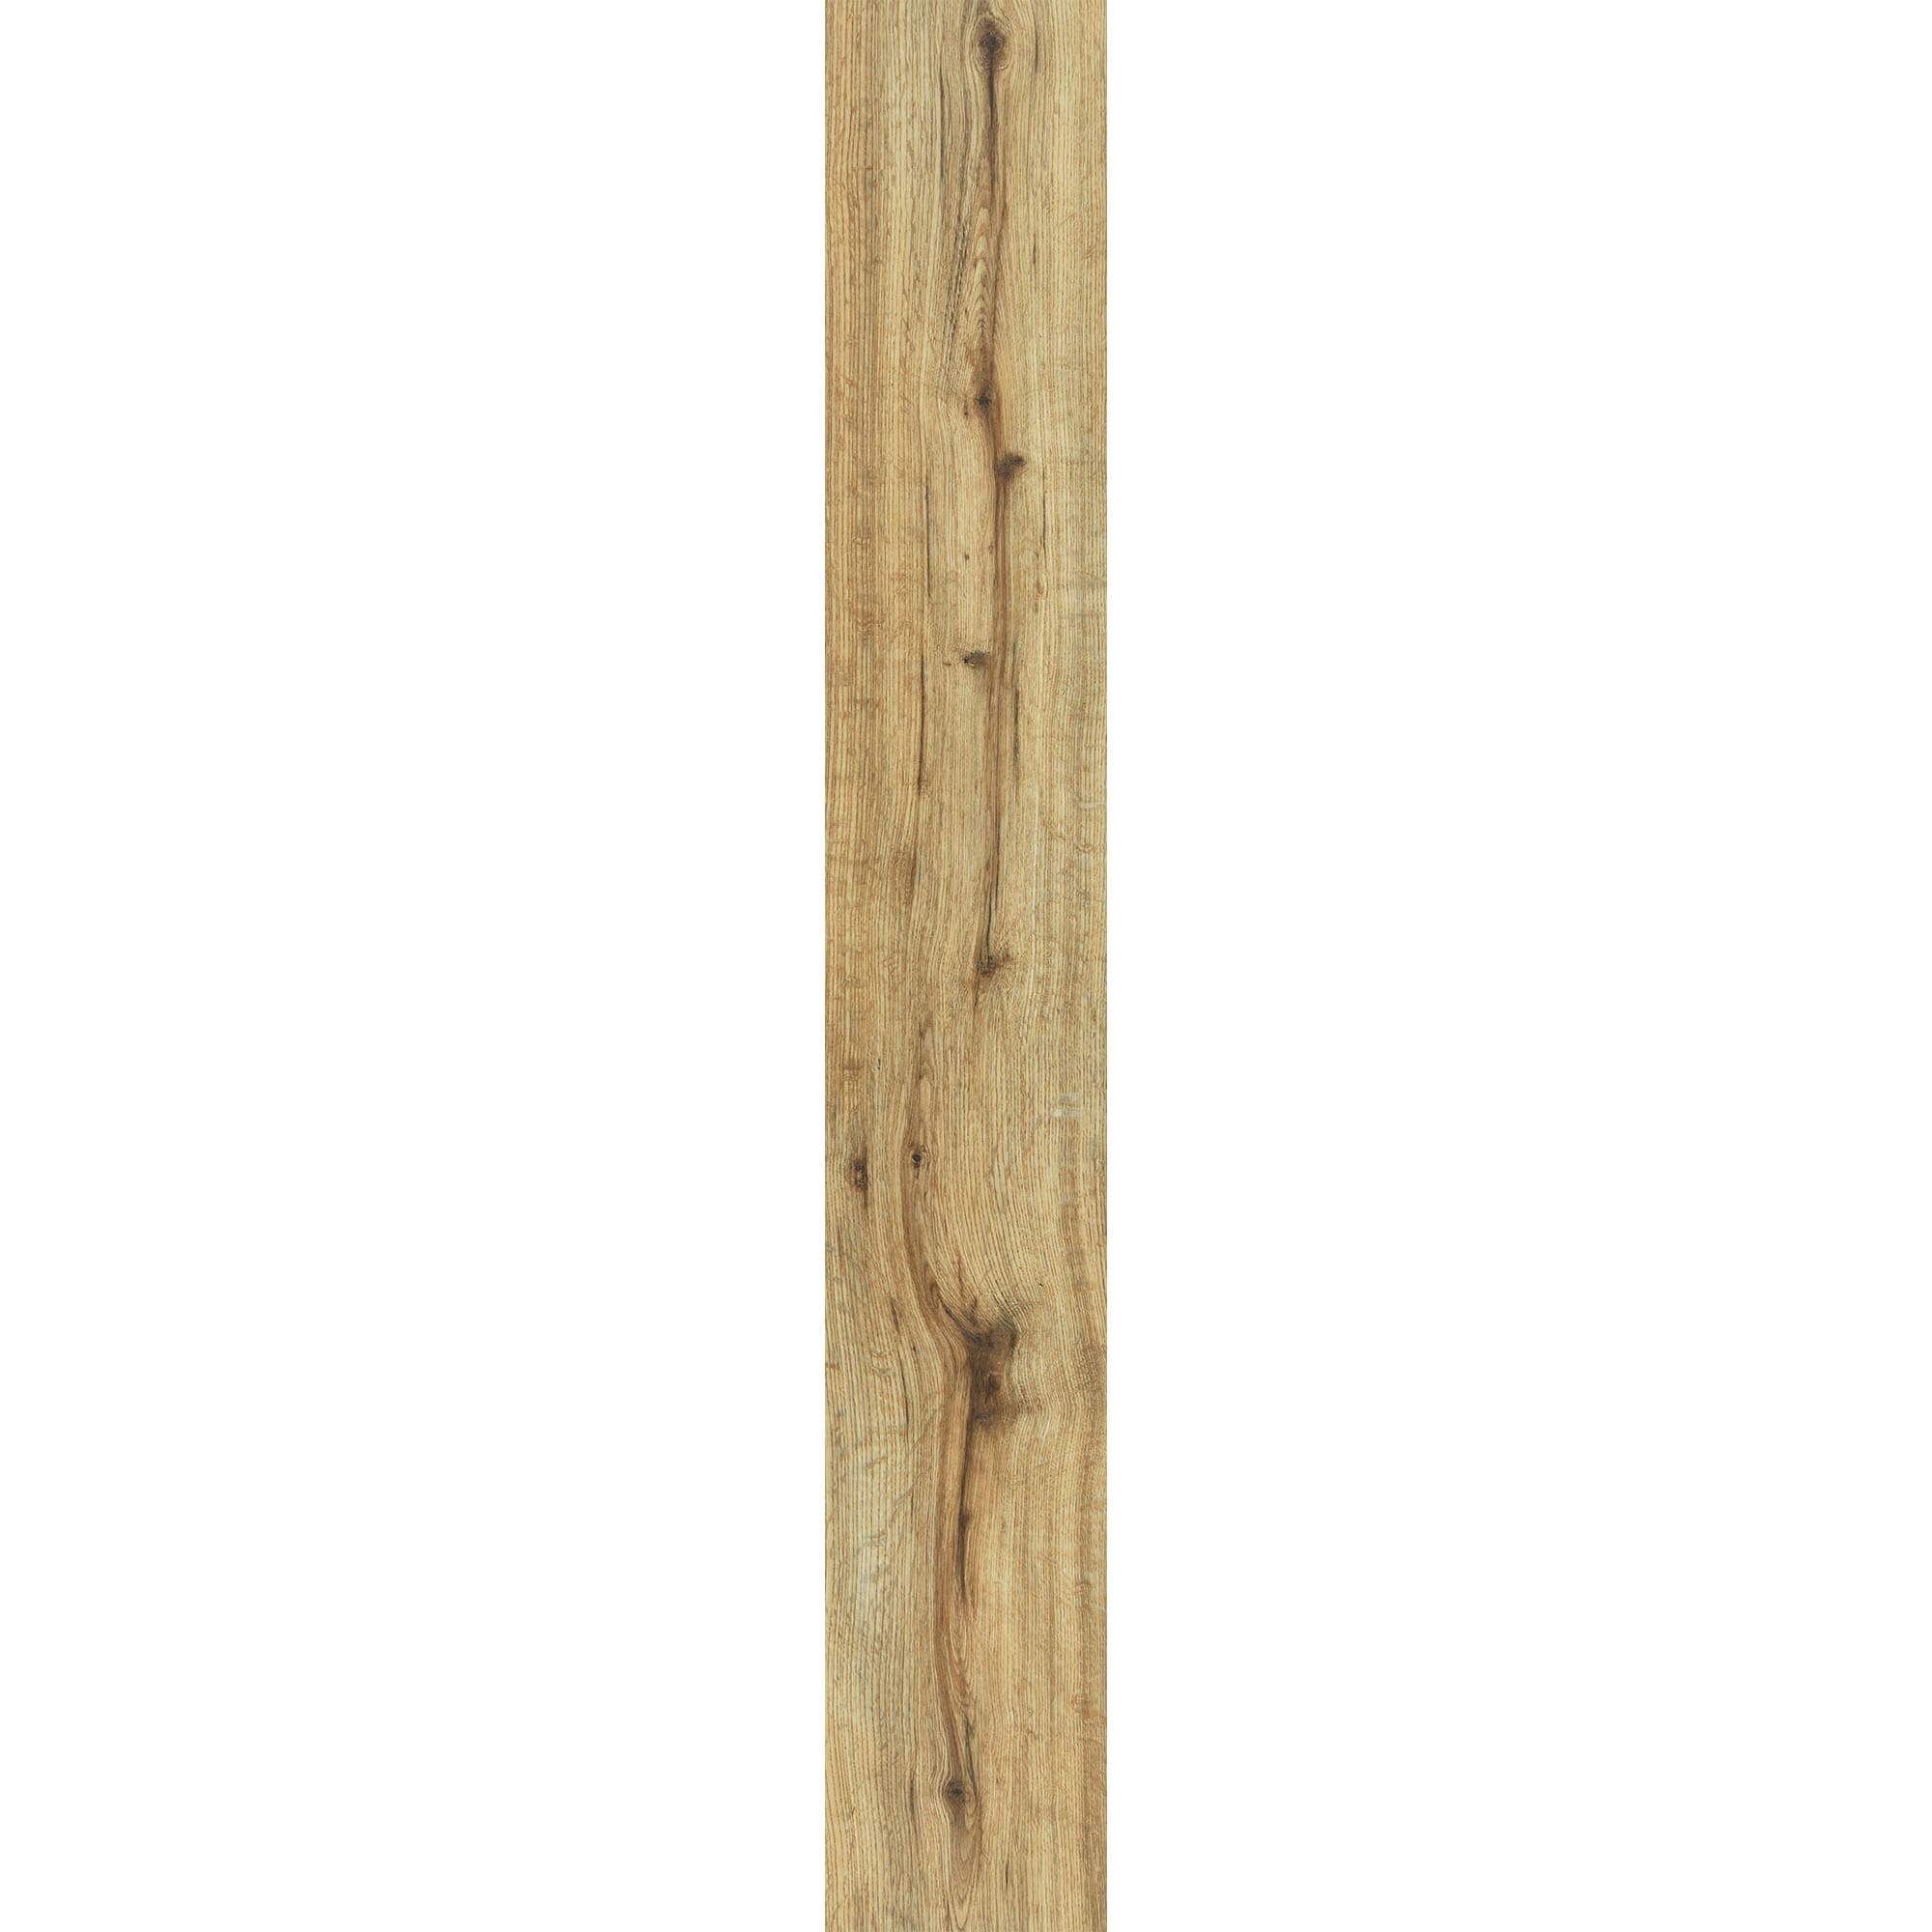 FMSC - Perfect Plank Specialty Lumber